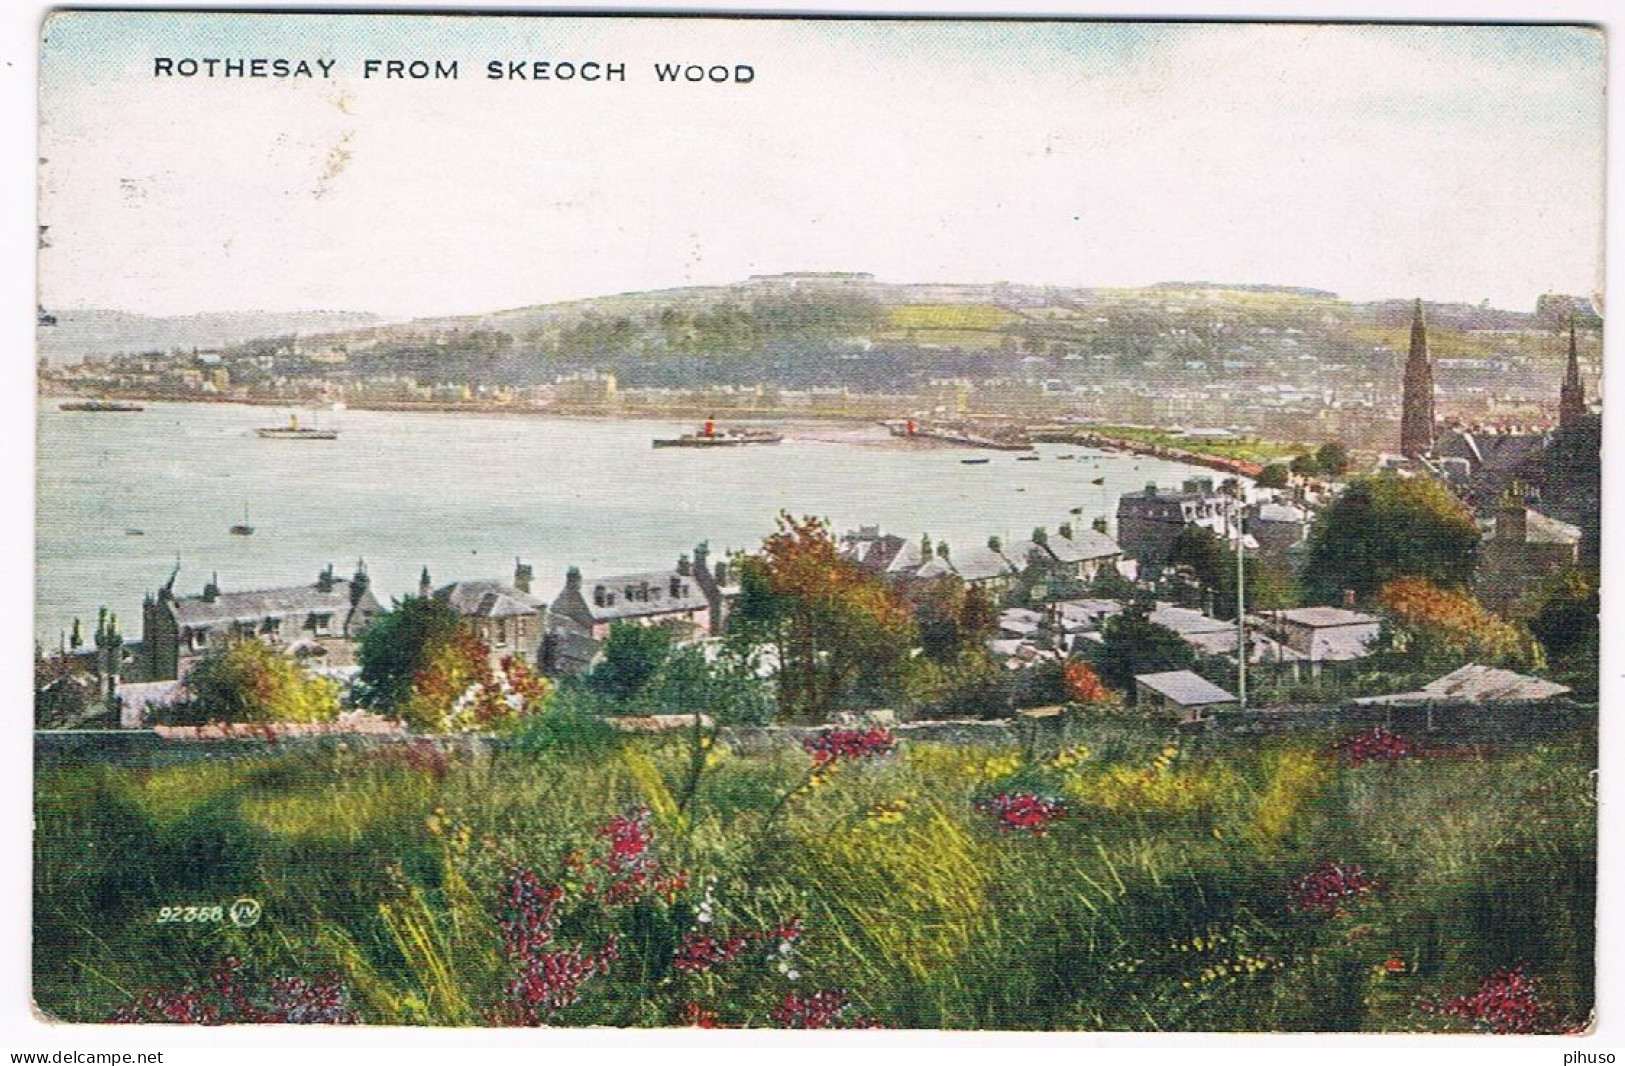 UK-4032  ROTHESAY : From Skeoch Wood - Bute